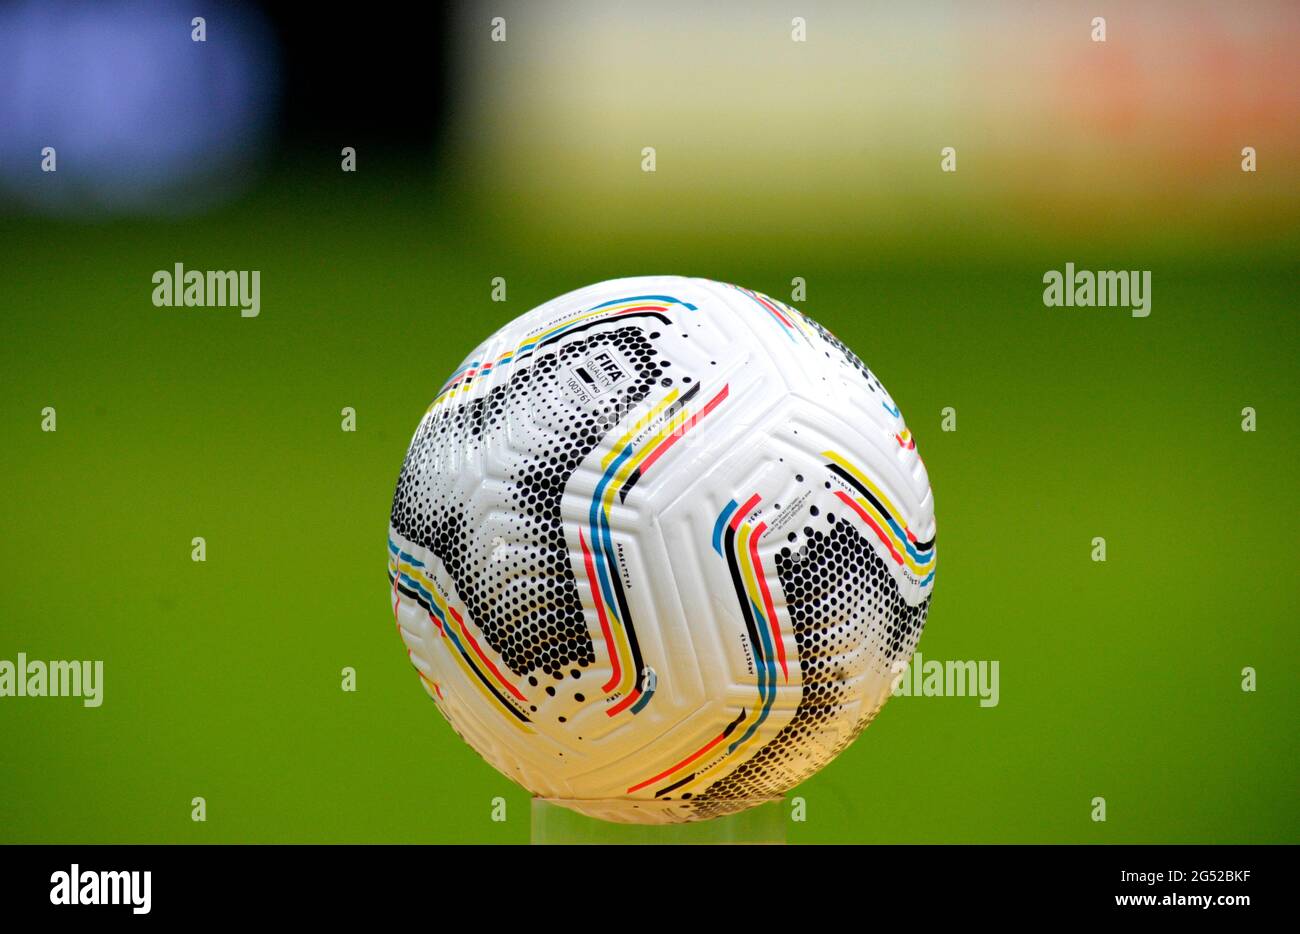 BRASILIA, BRAZIL - JUNE 24: The NIKE Official ball of Copa America' Strike ' ,during the match between Chile and Paraguay as part of Conmebol Copa America Brazil 2021 at Mane Garrincha Stadium on June 24, 2021 in Brasilia, Brazil. (MB Media) Stock Photo